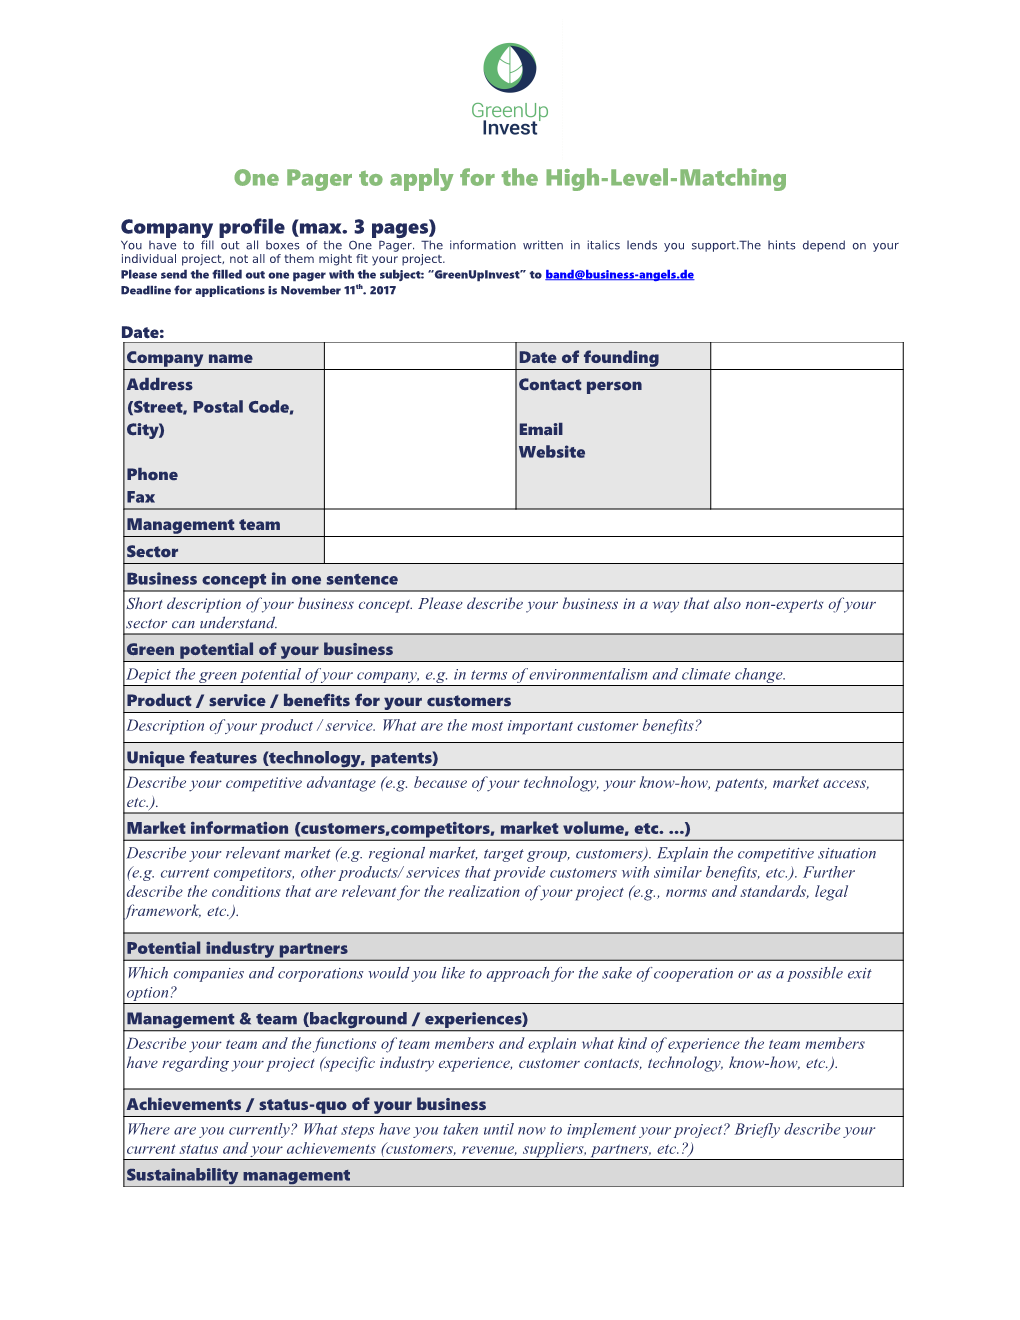 One Pager to Apply for the High-Level-Matching